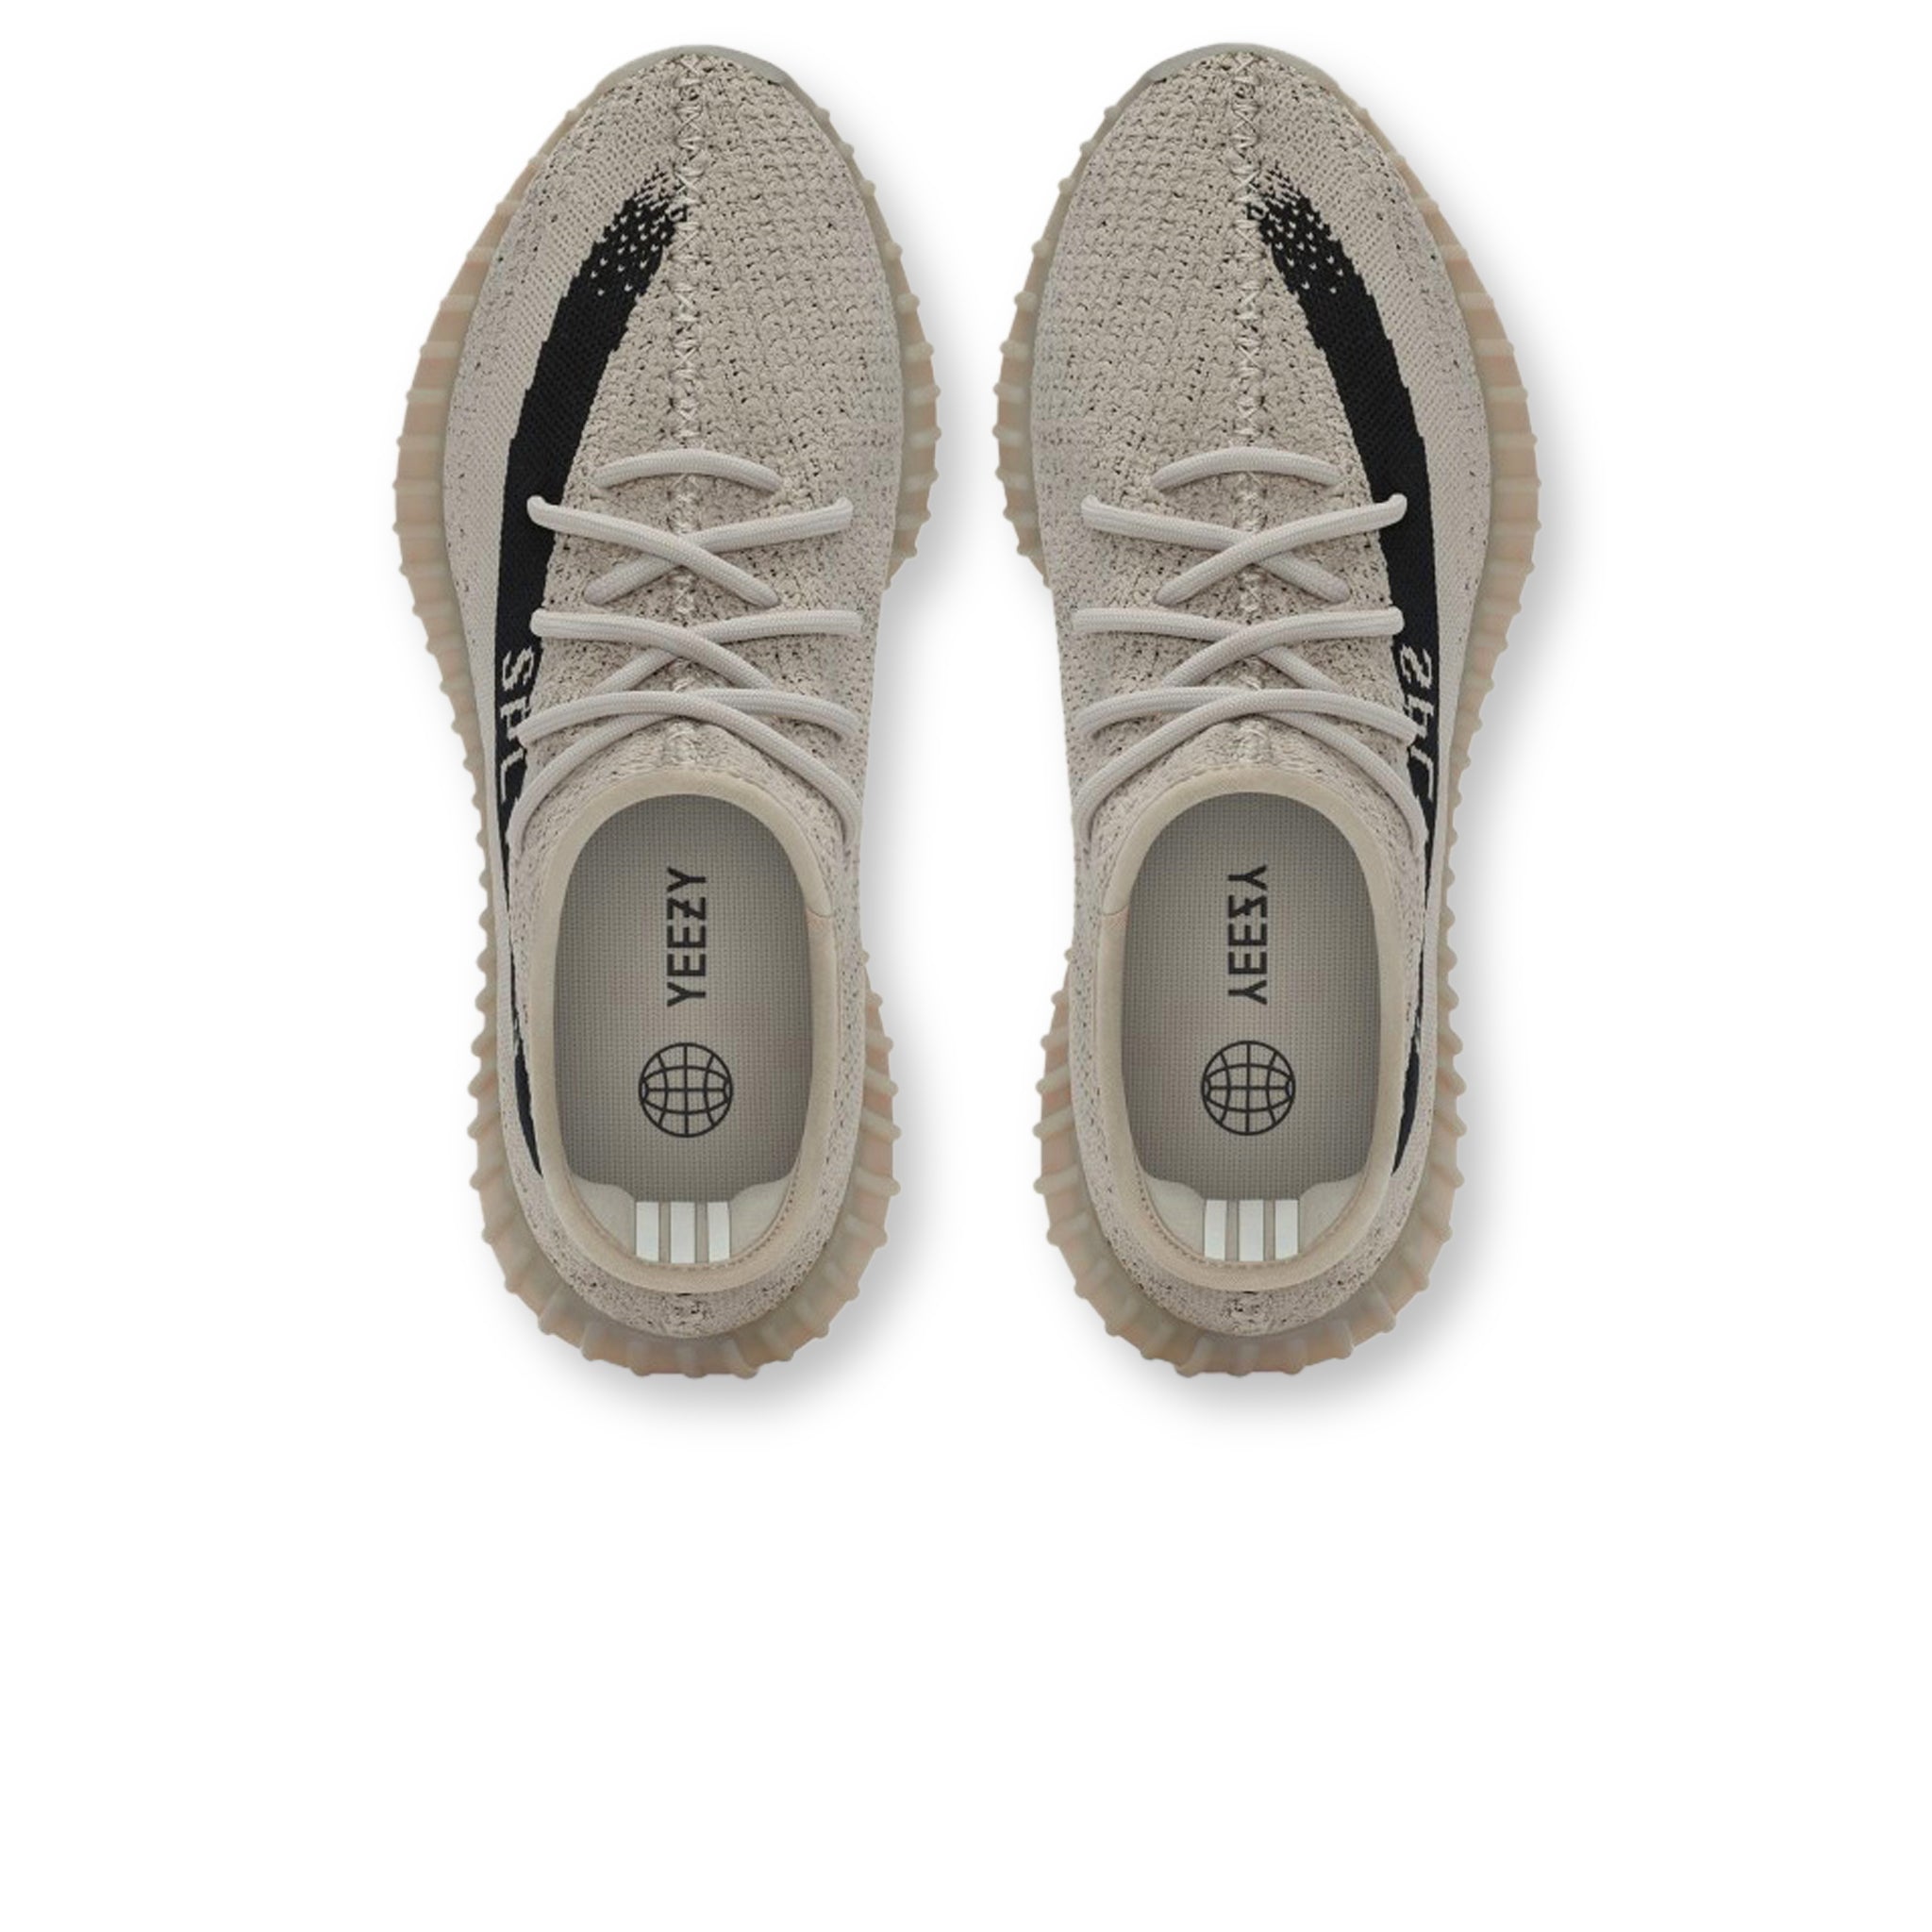 Top down view of Adidas Yeezy Boost 350 V2 Slate HP7870